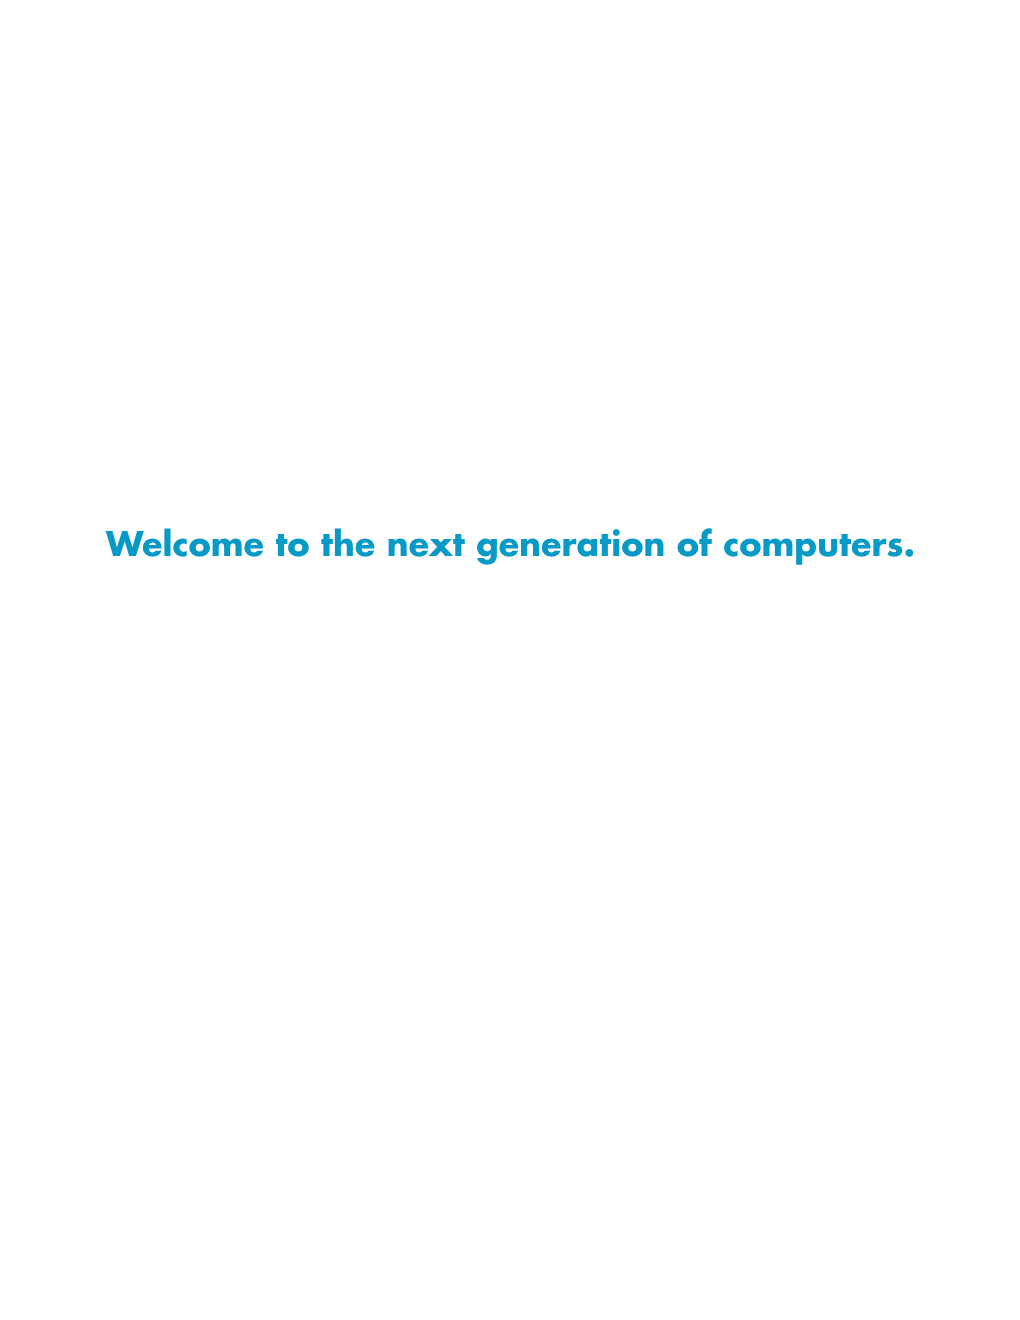 Welcome to the Next Generation of Computers